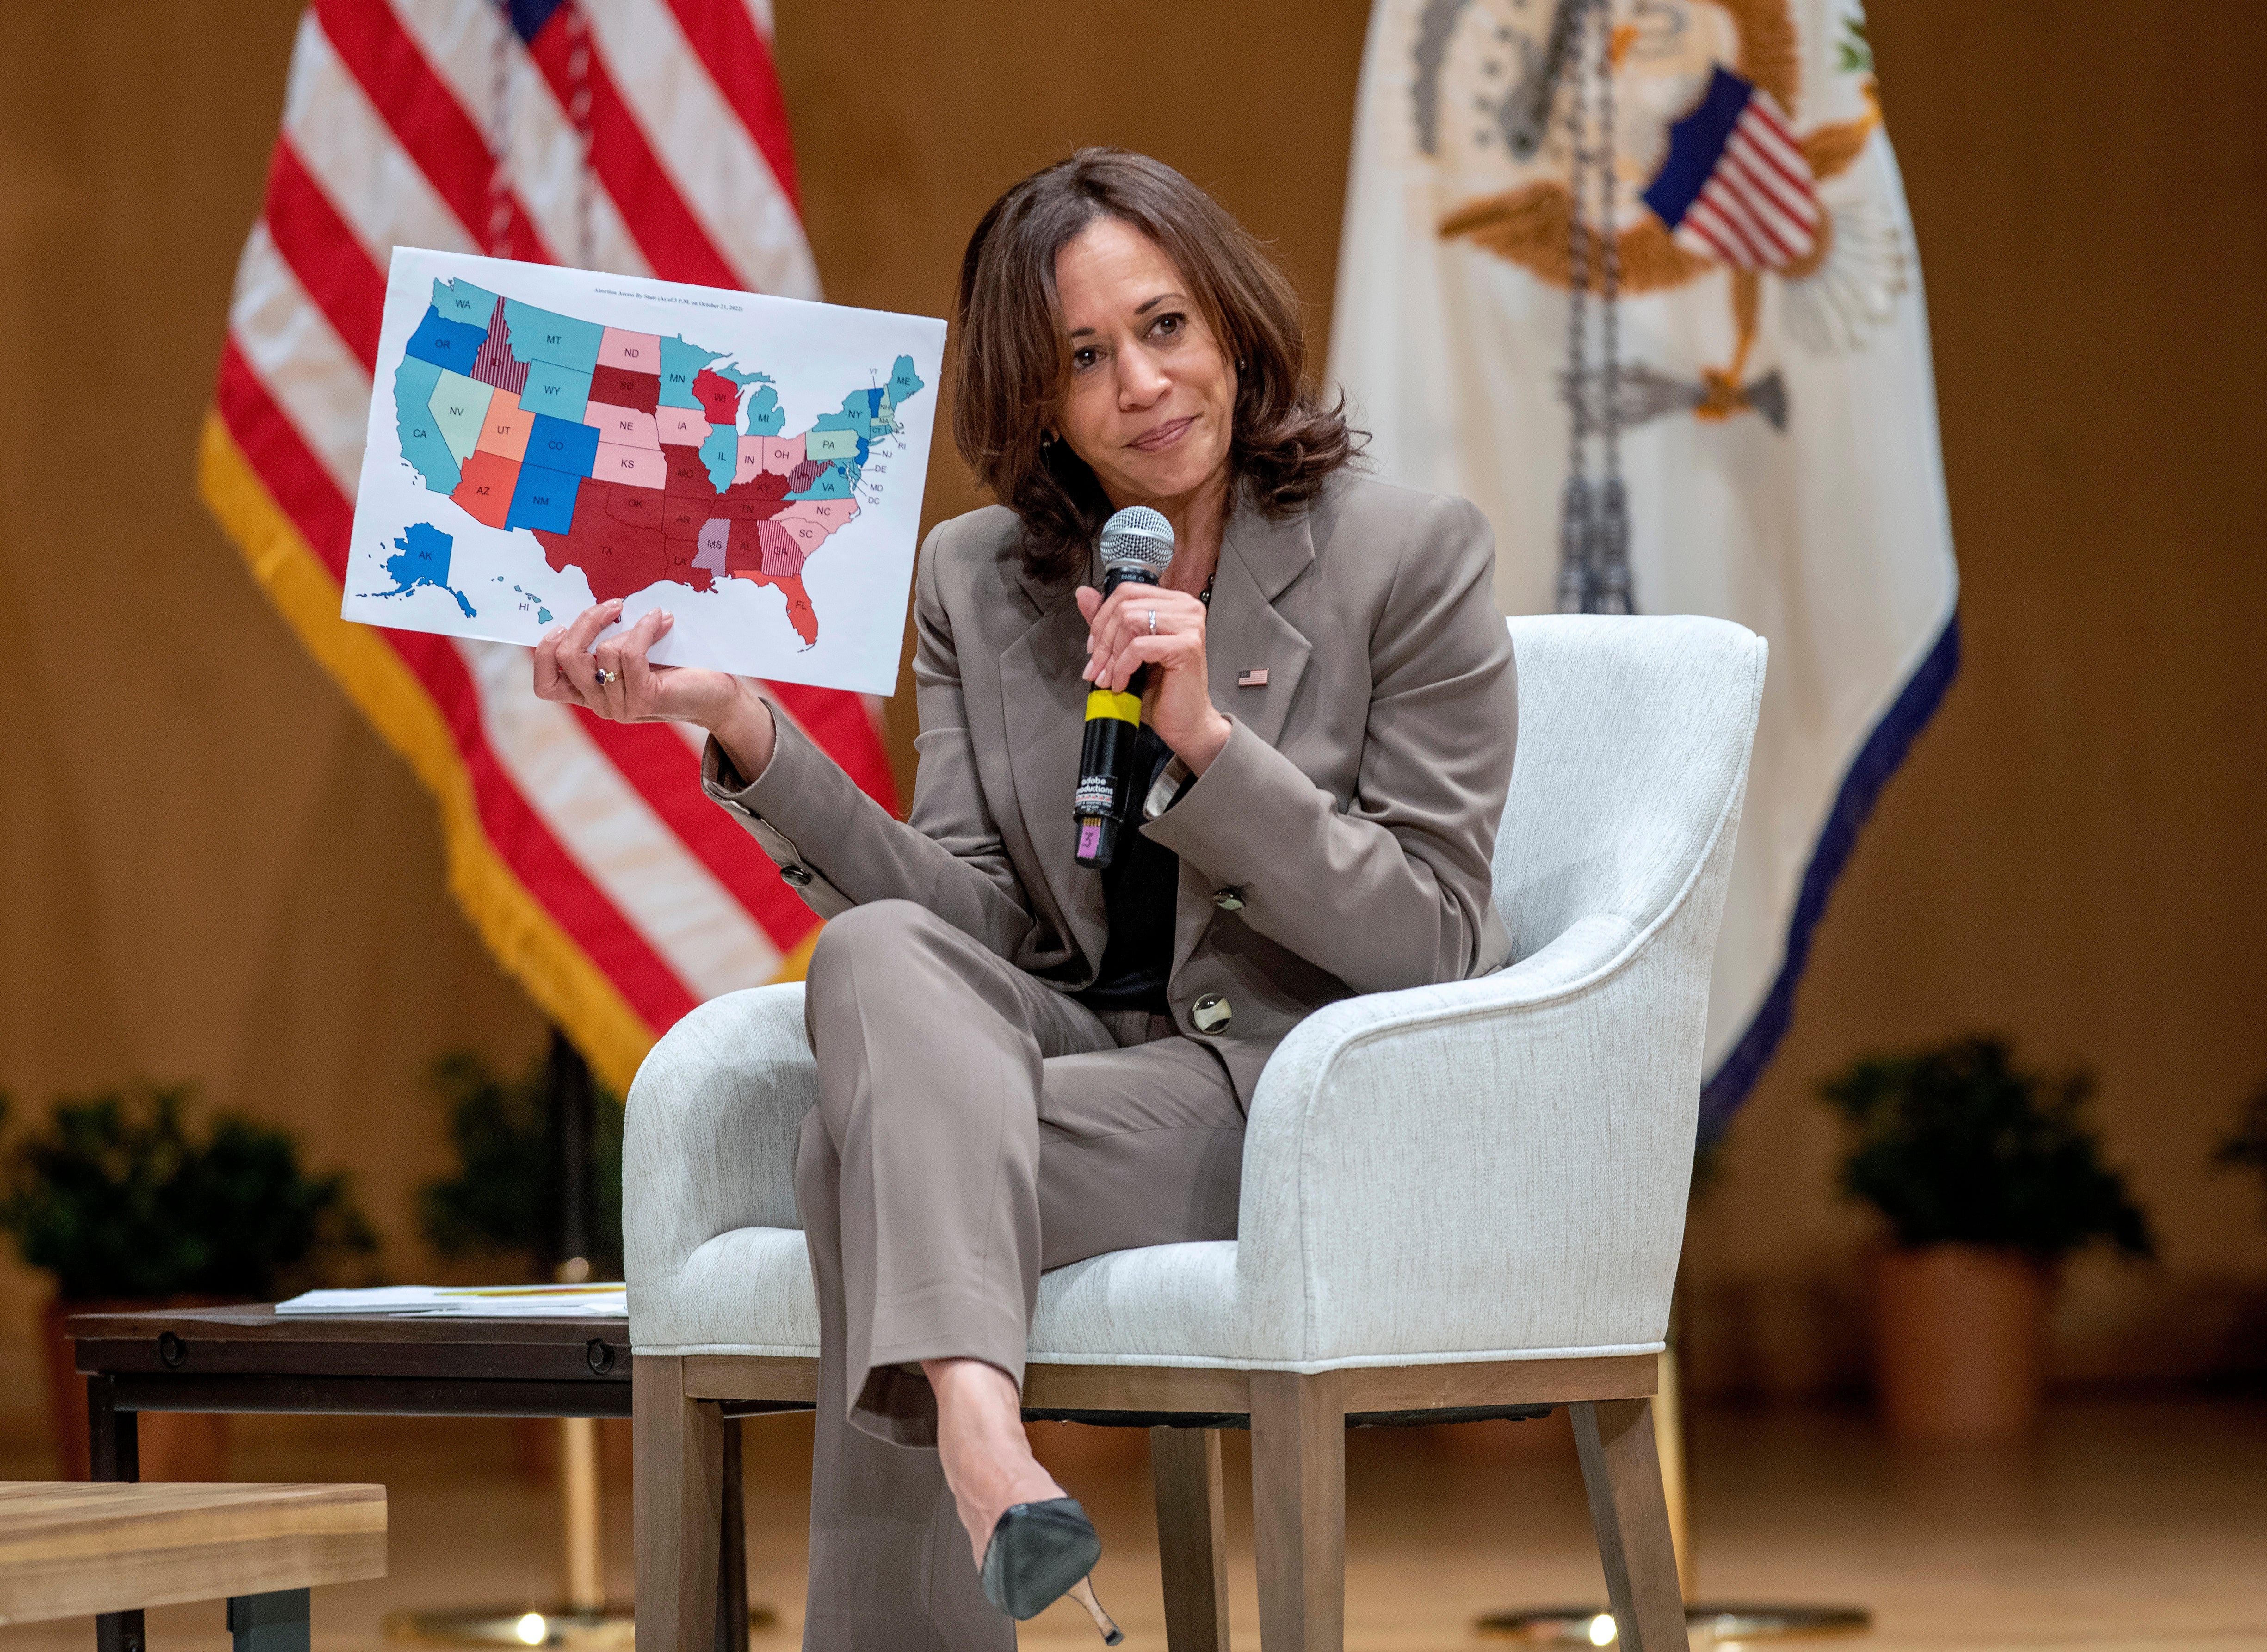 Kamala Harris holds up a map showing the inconsistency of abortion access in the US after the overturn of Roe v Wade